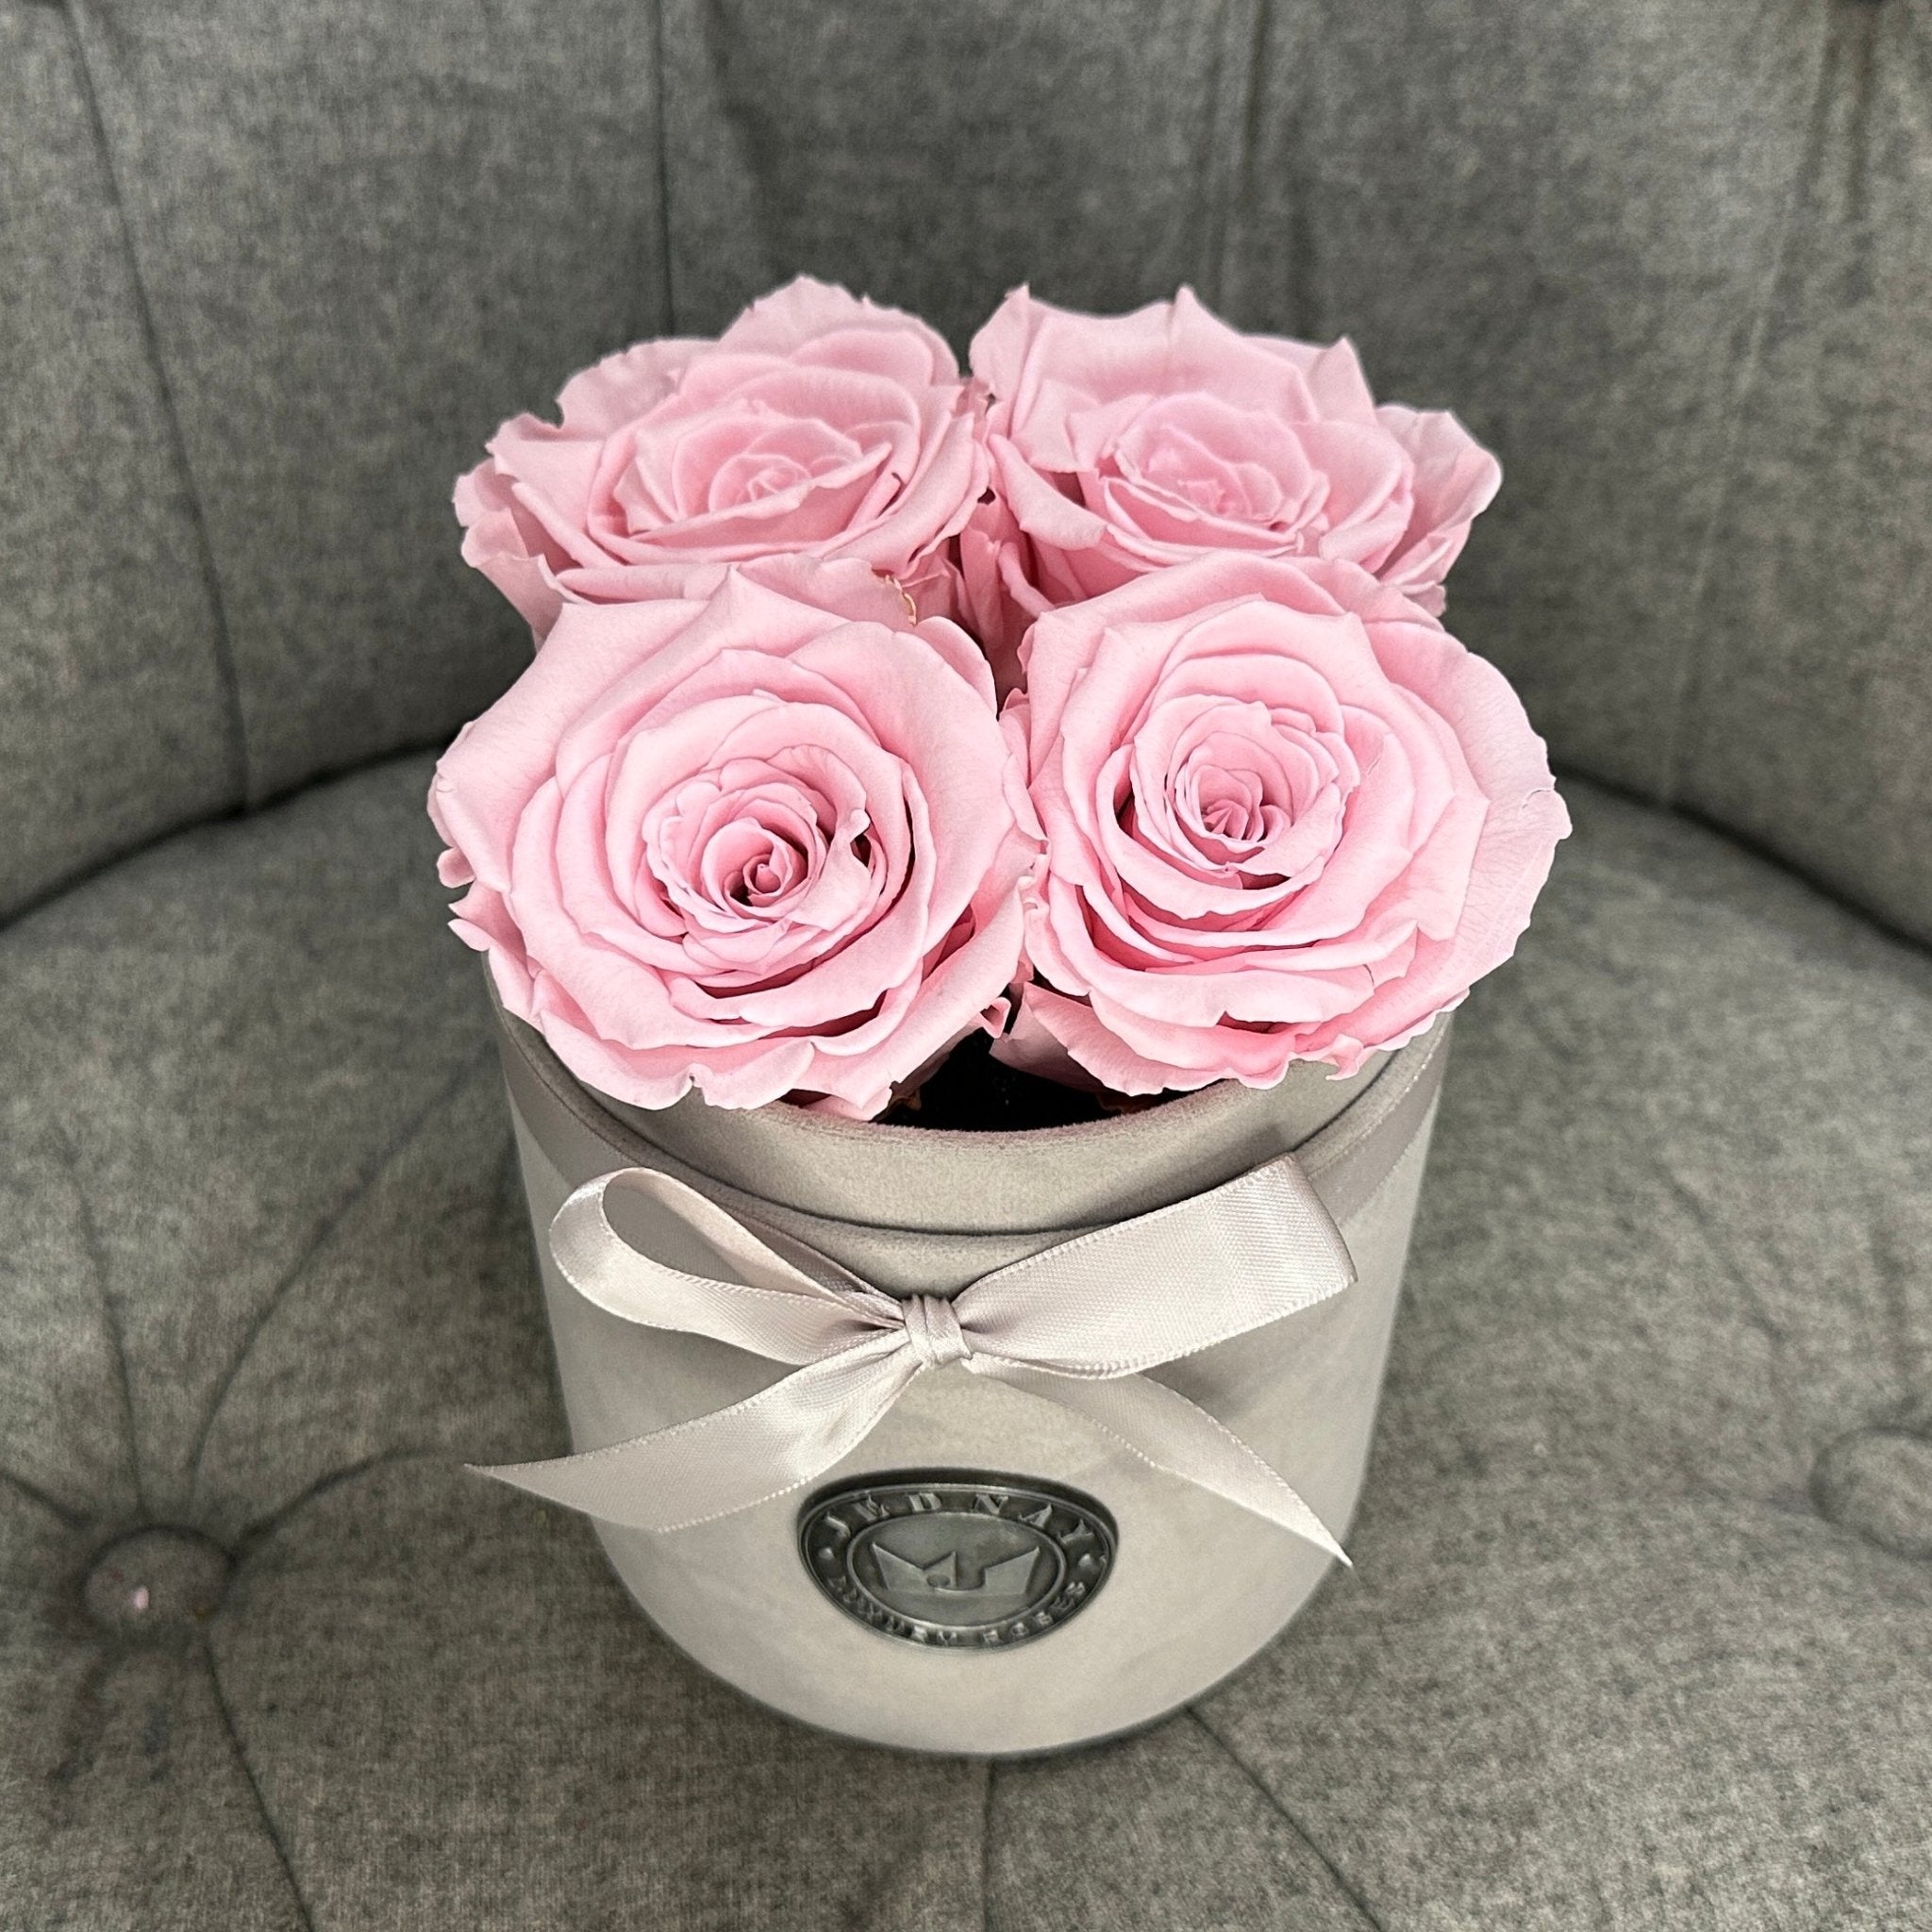 Petite Grey Suede Forever Rose Box - Soft Pink Eternal Roses - Jednay Roses